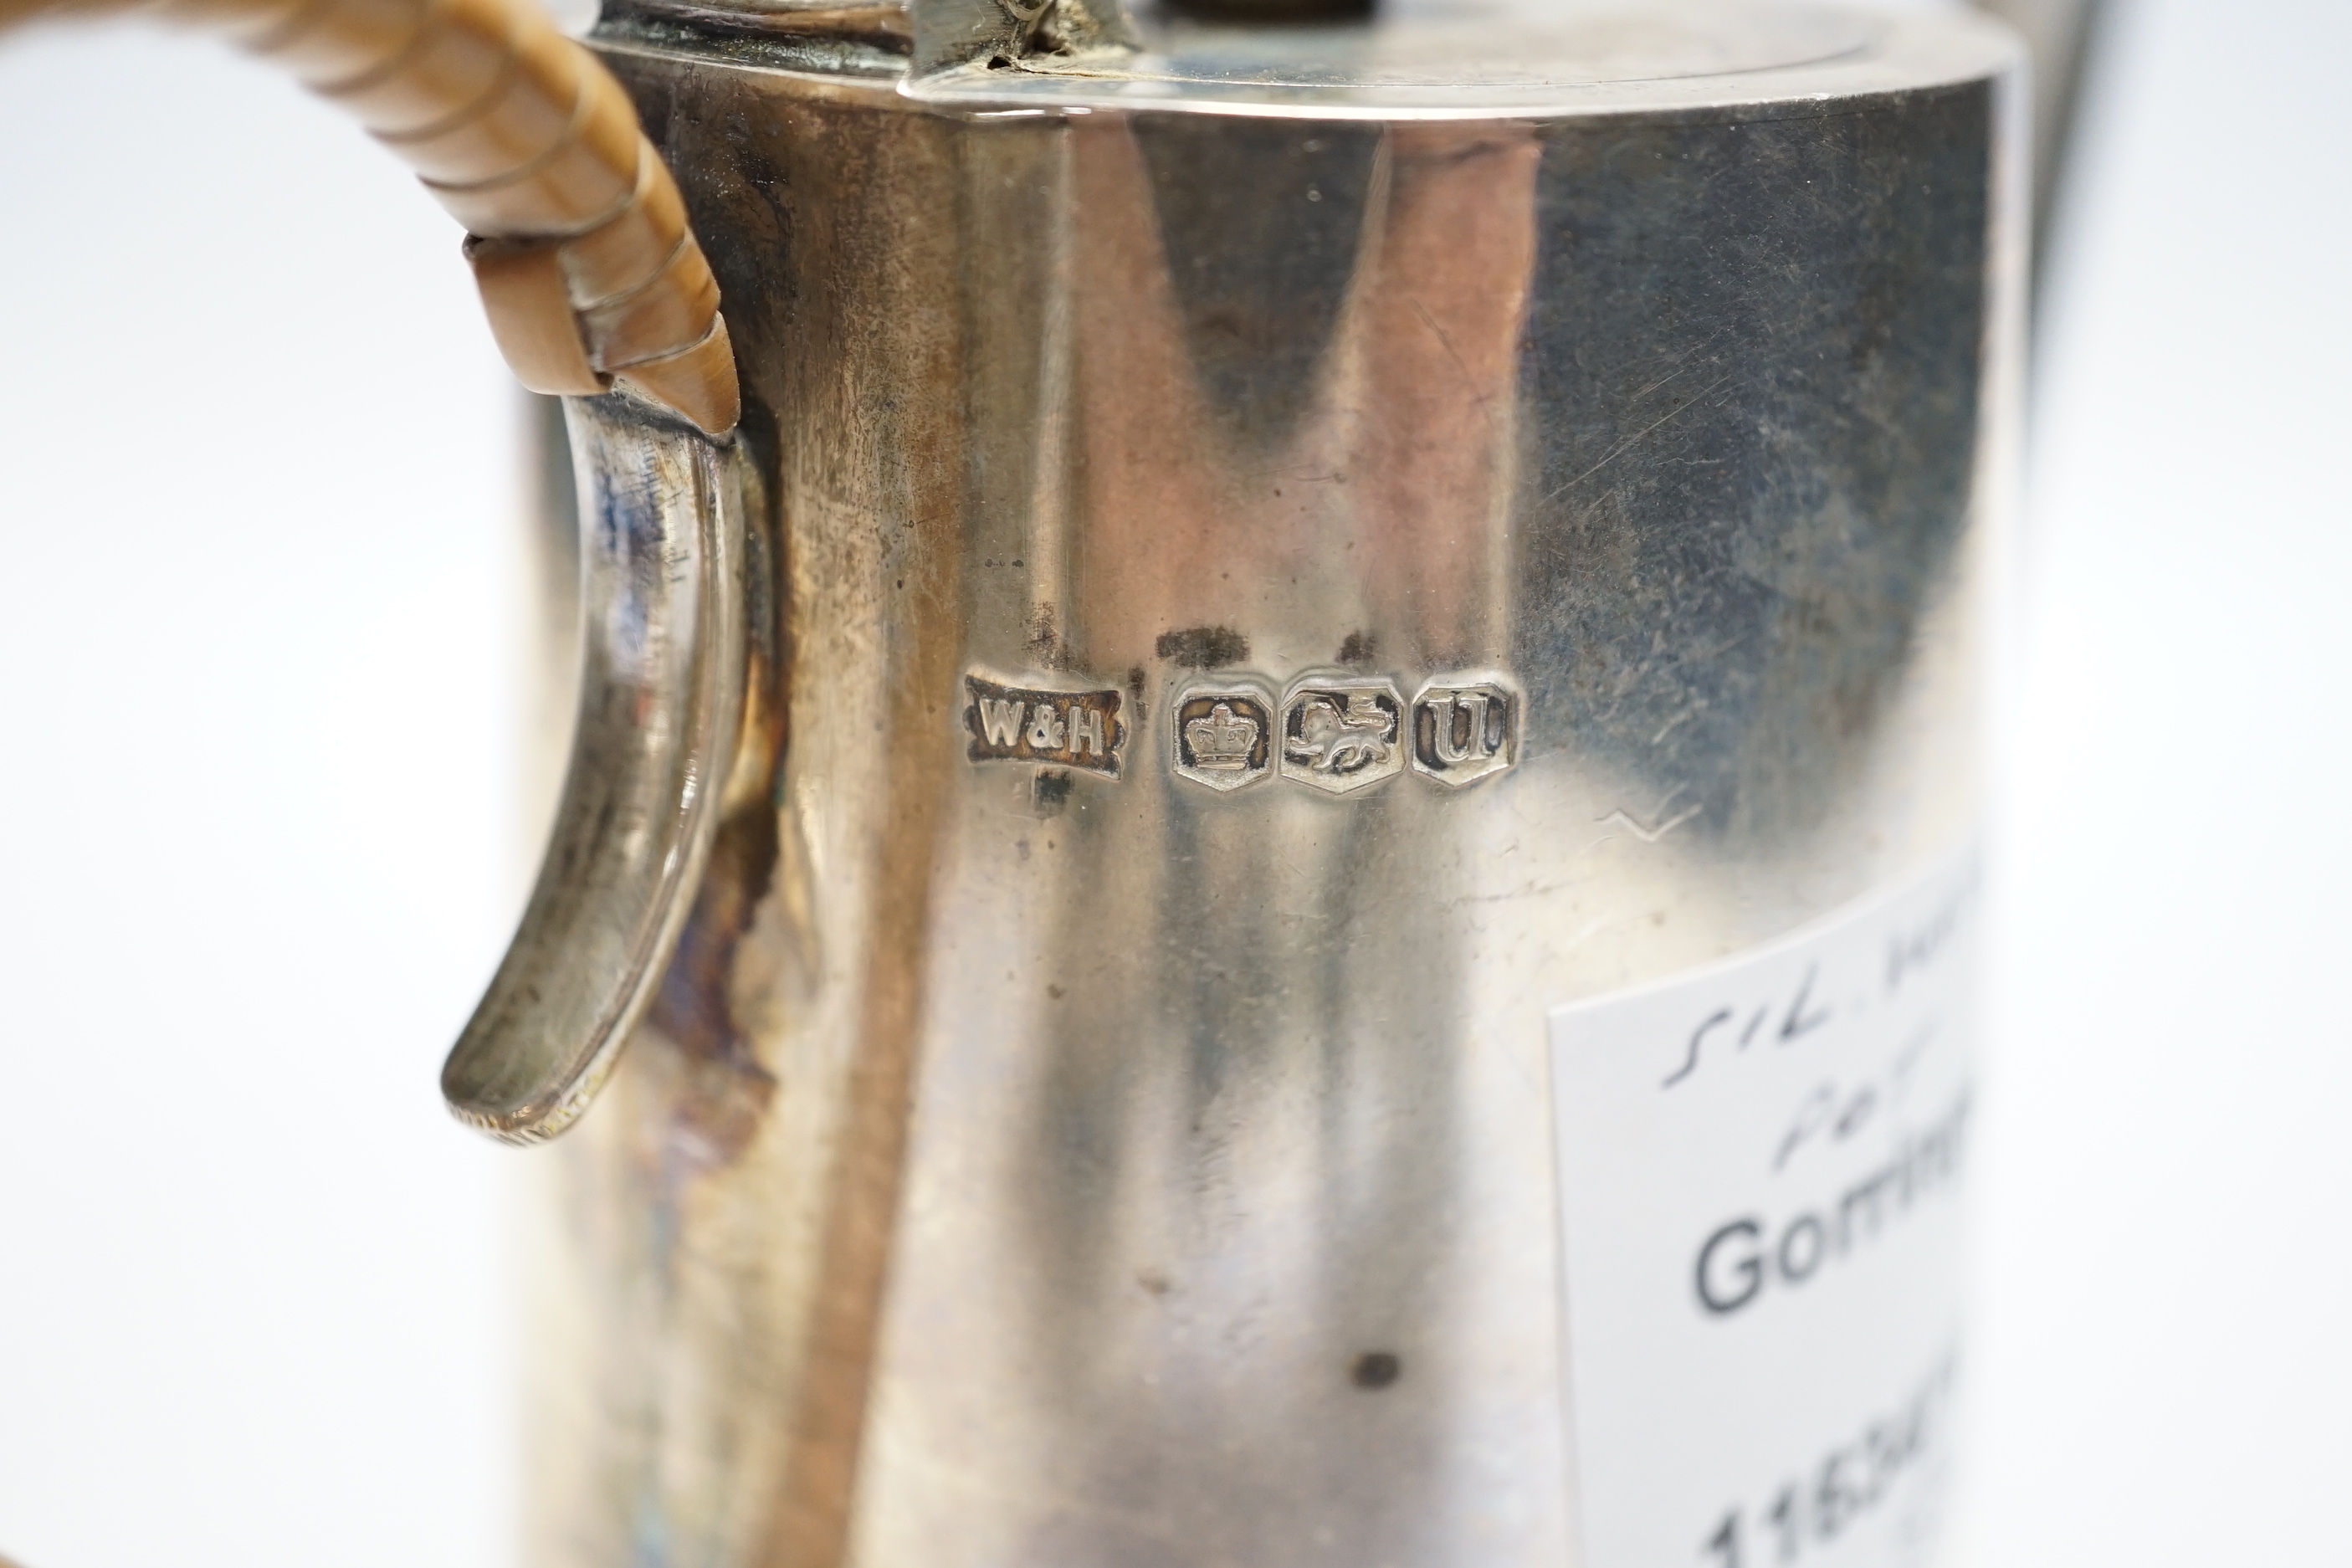 A George VI silver hot water pot, with rattan handle, Walker & Hall, Sheffield, 1937, height 15.7cm, gross weight 10.2oz.